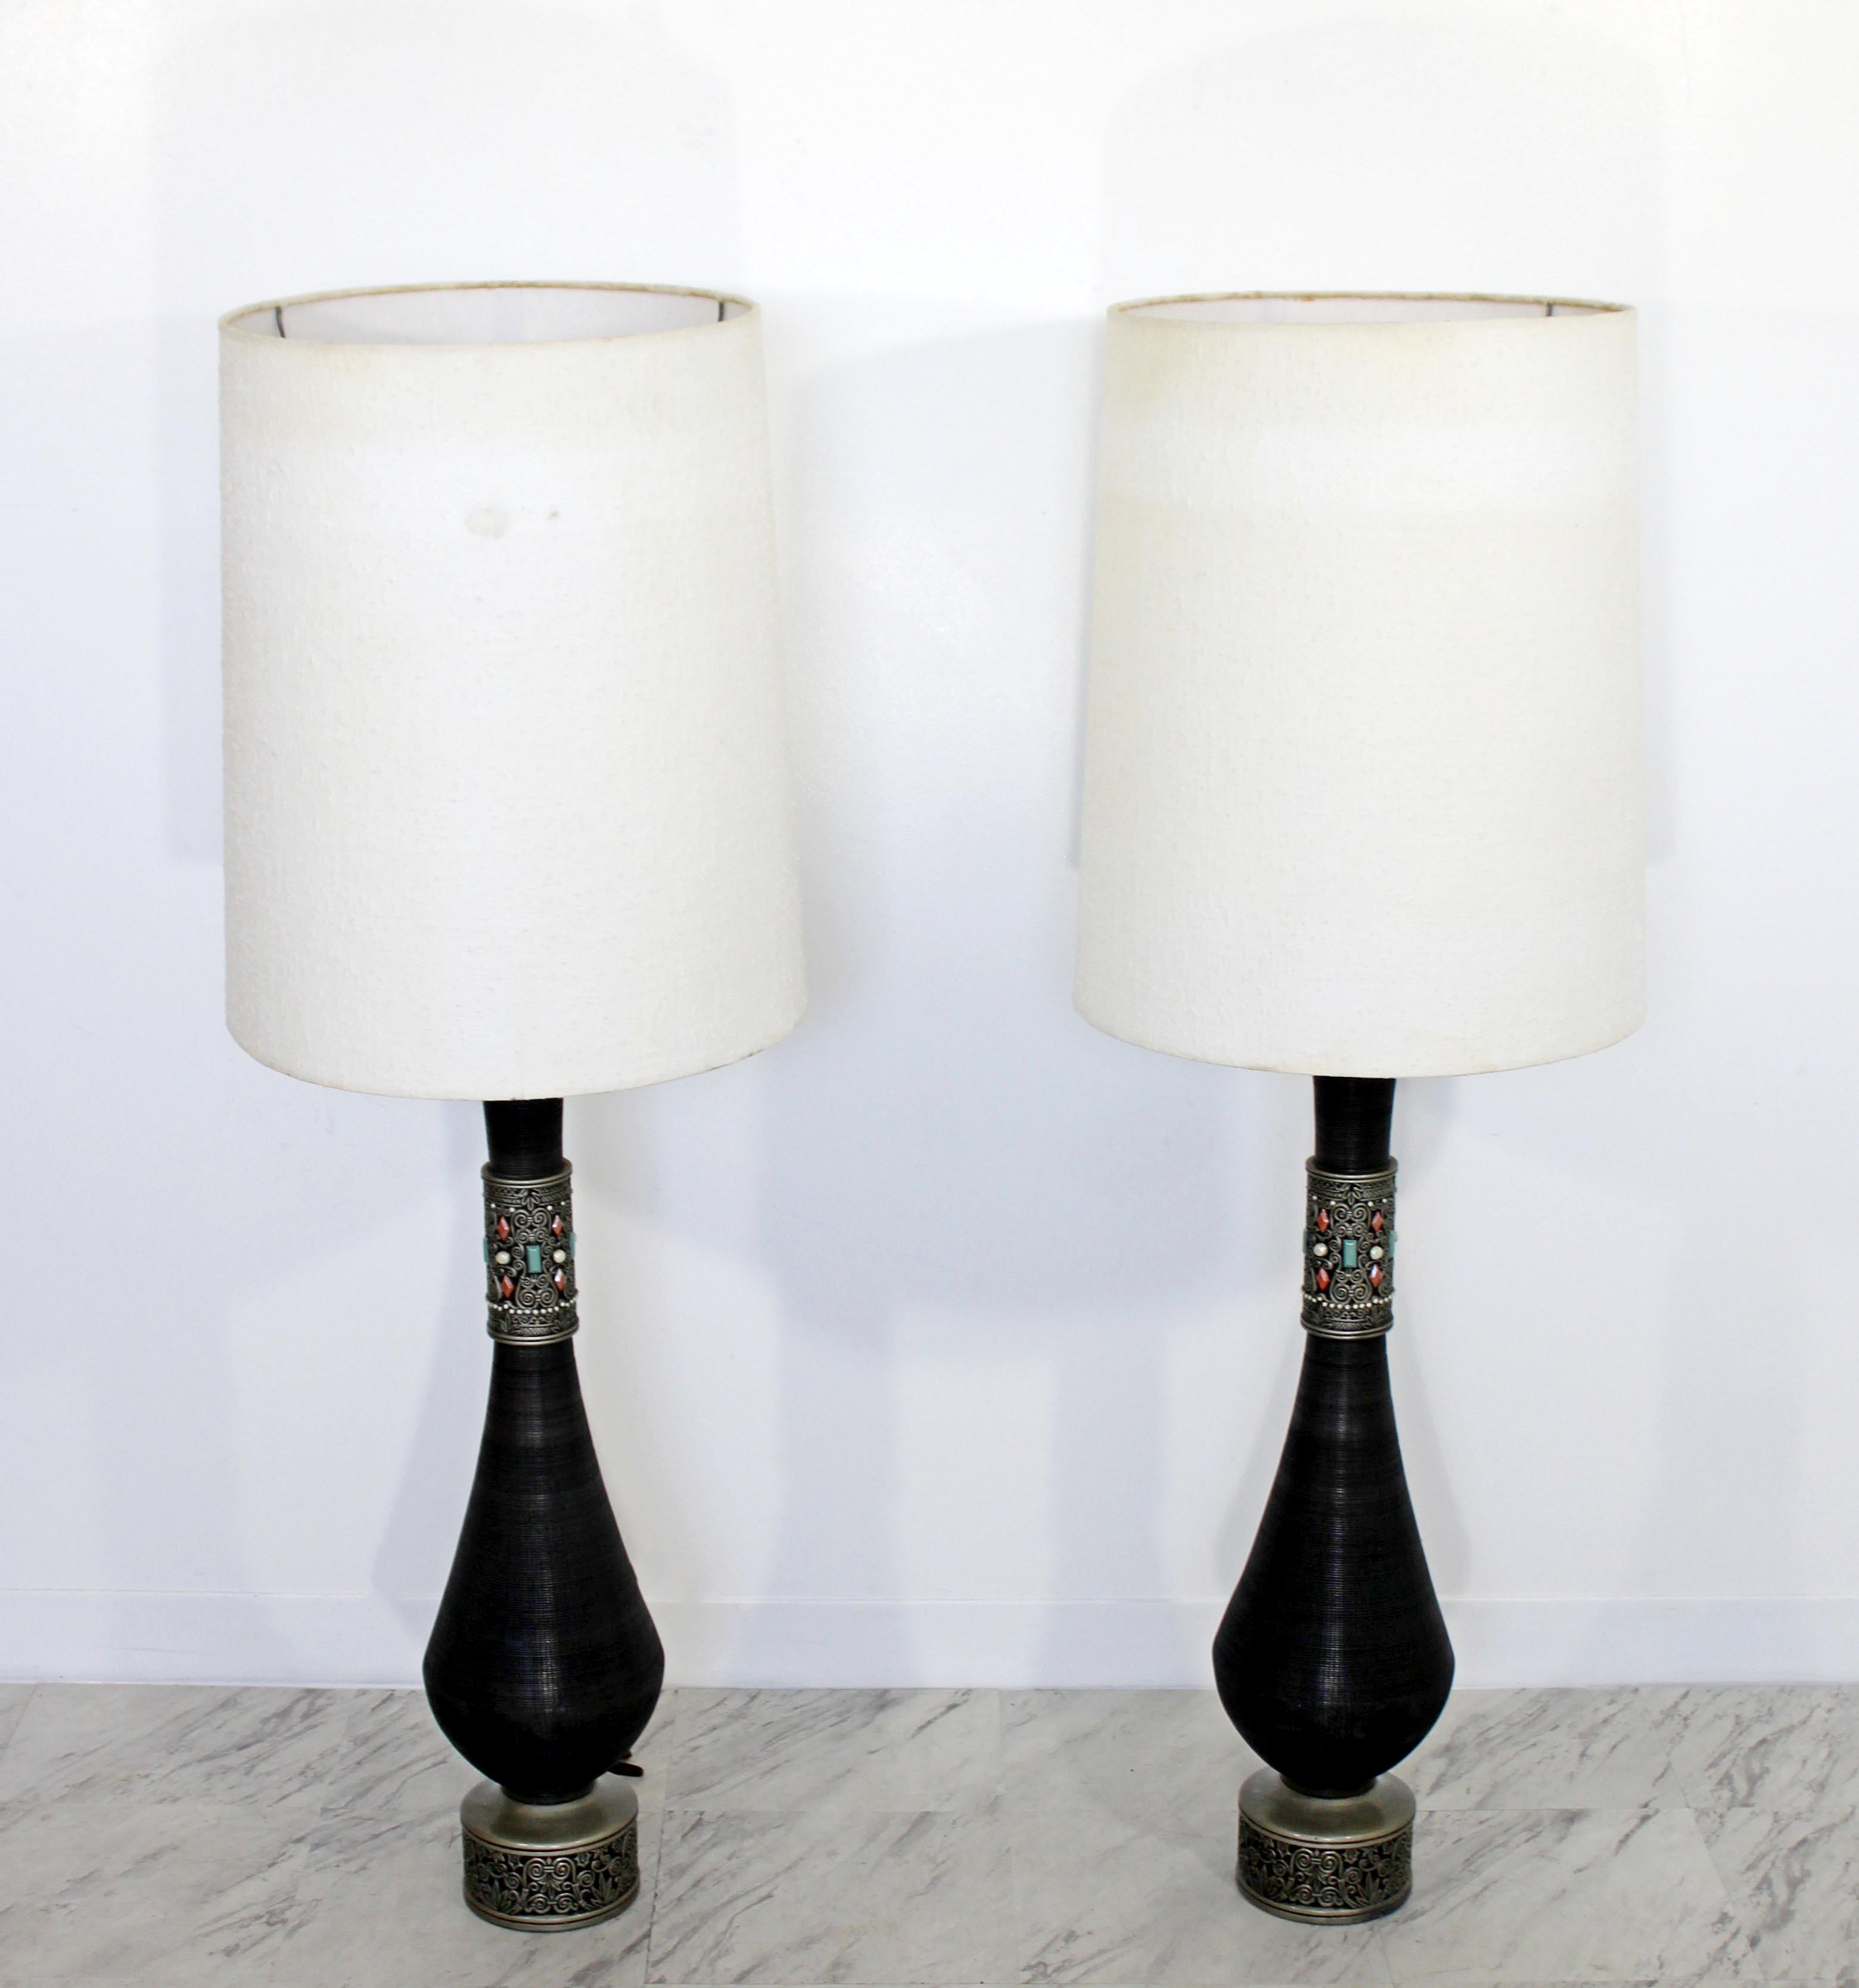 For your consideration is an incredible pair of tall, ceramic, table lamps, by Firenze Reglor of California. In excellent condition, despite one chip on the base. The dimensions of the lamps are 7